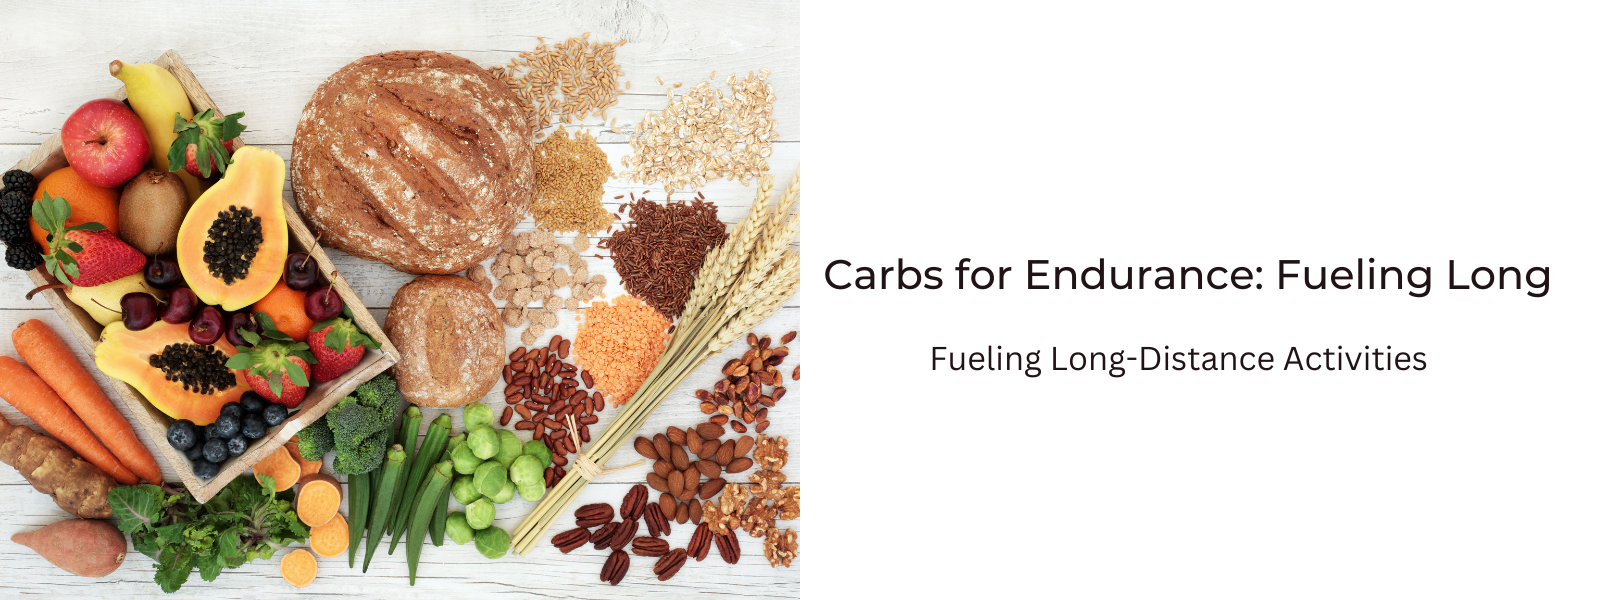 Carbs for Endurance: Fueling Long-Distance Activities